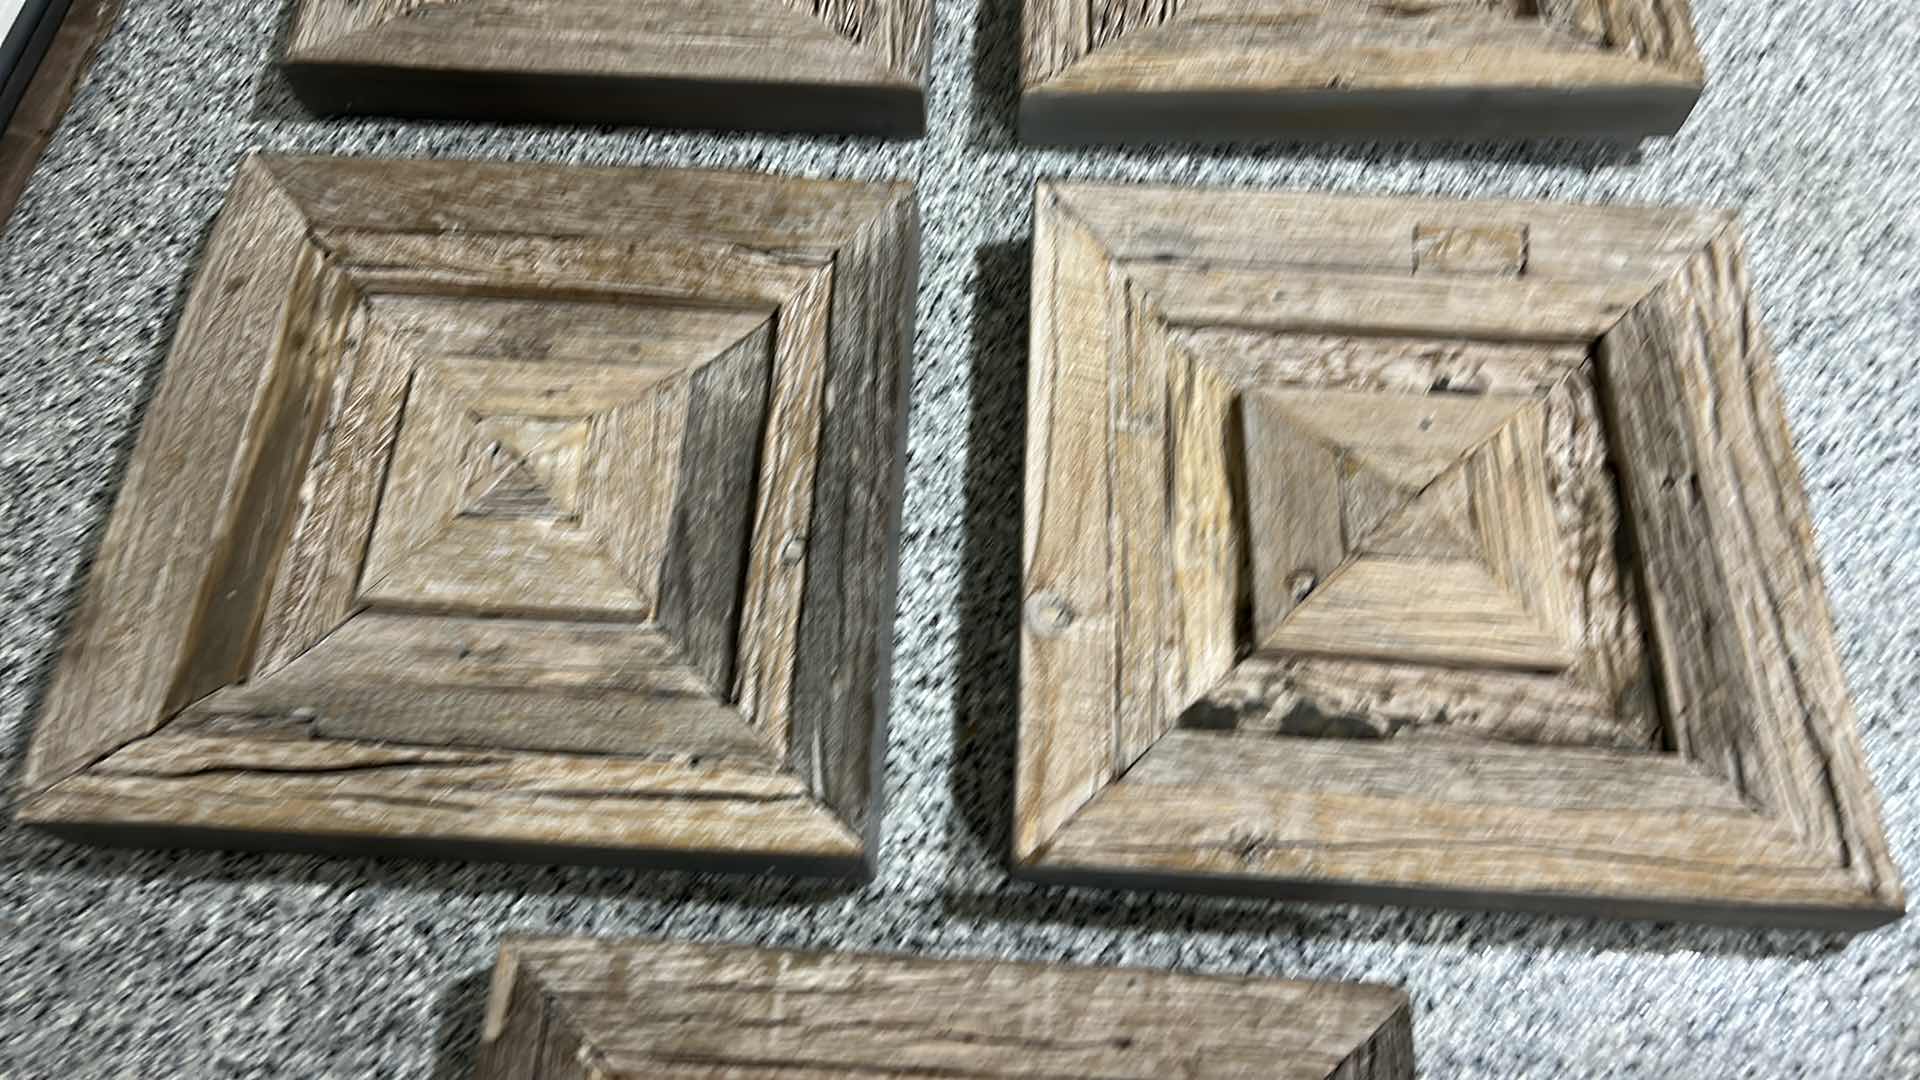 Photo 3 of 5 HEAVY RUSTIC WOOD WALL DECOR (EACH SQUARE IS SOLID WOOD 2’ x 2’ x 3” THICK